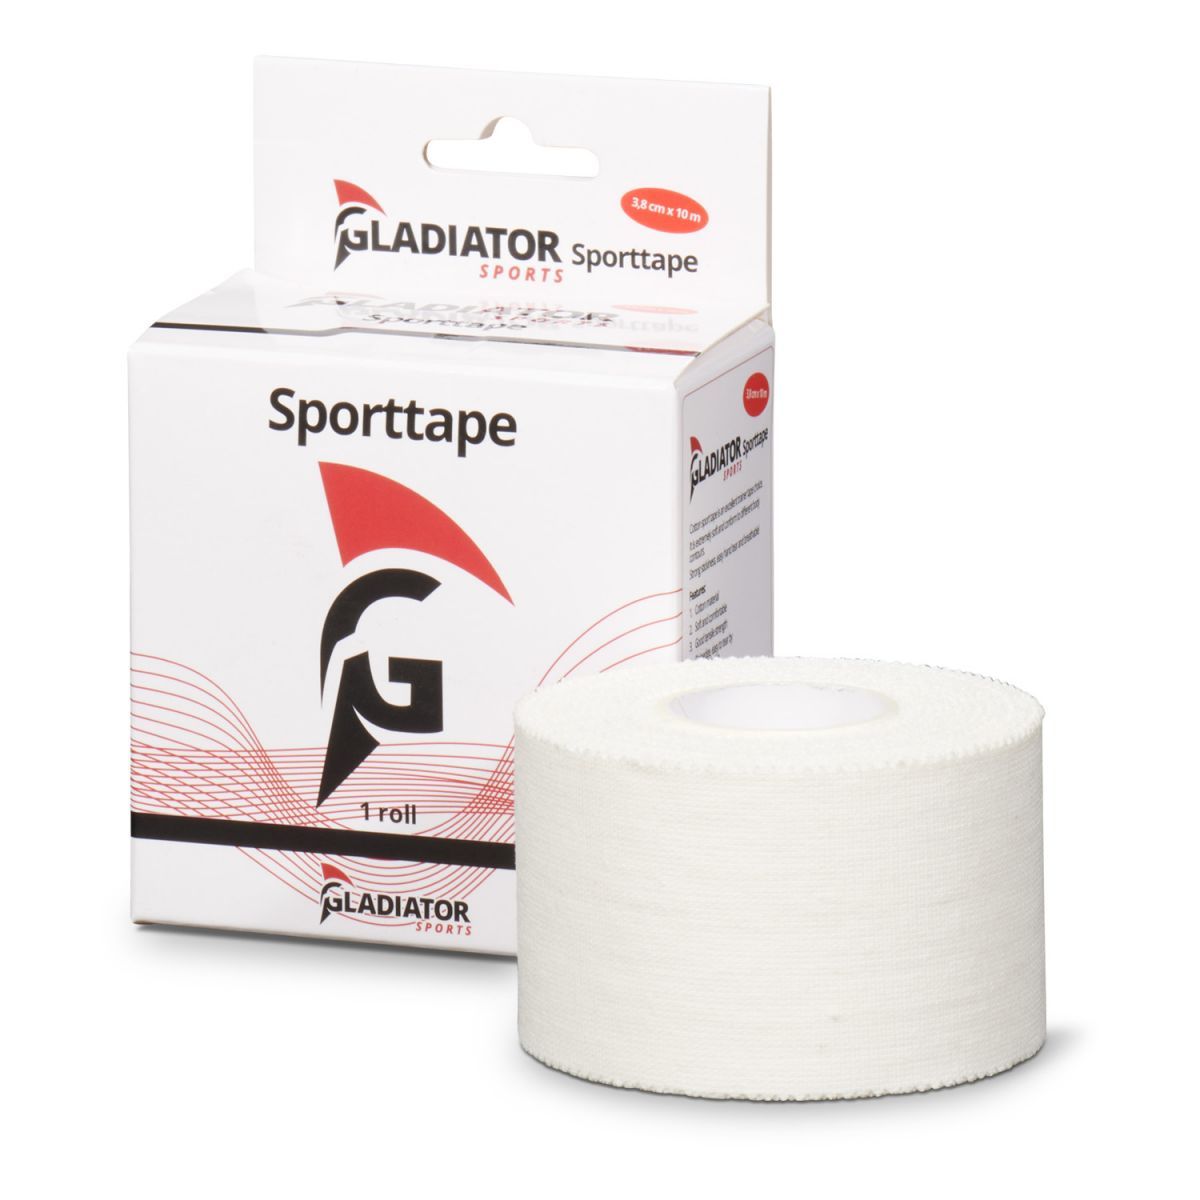 Gladiator Sports sports tape per roll with box